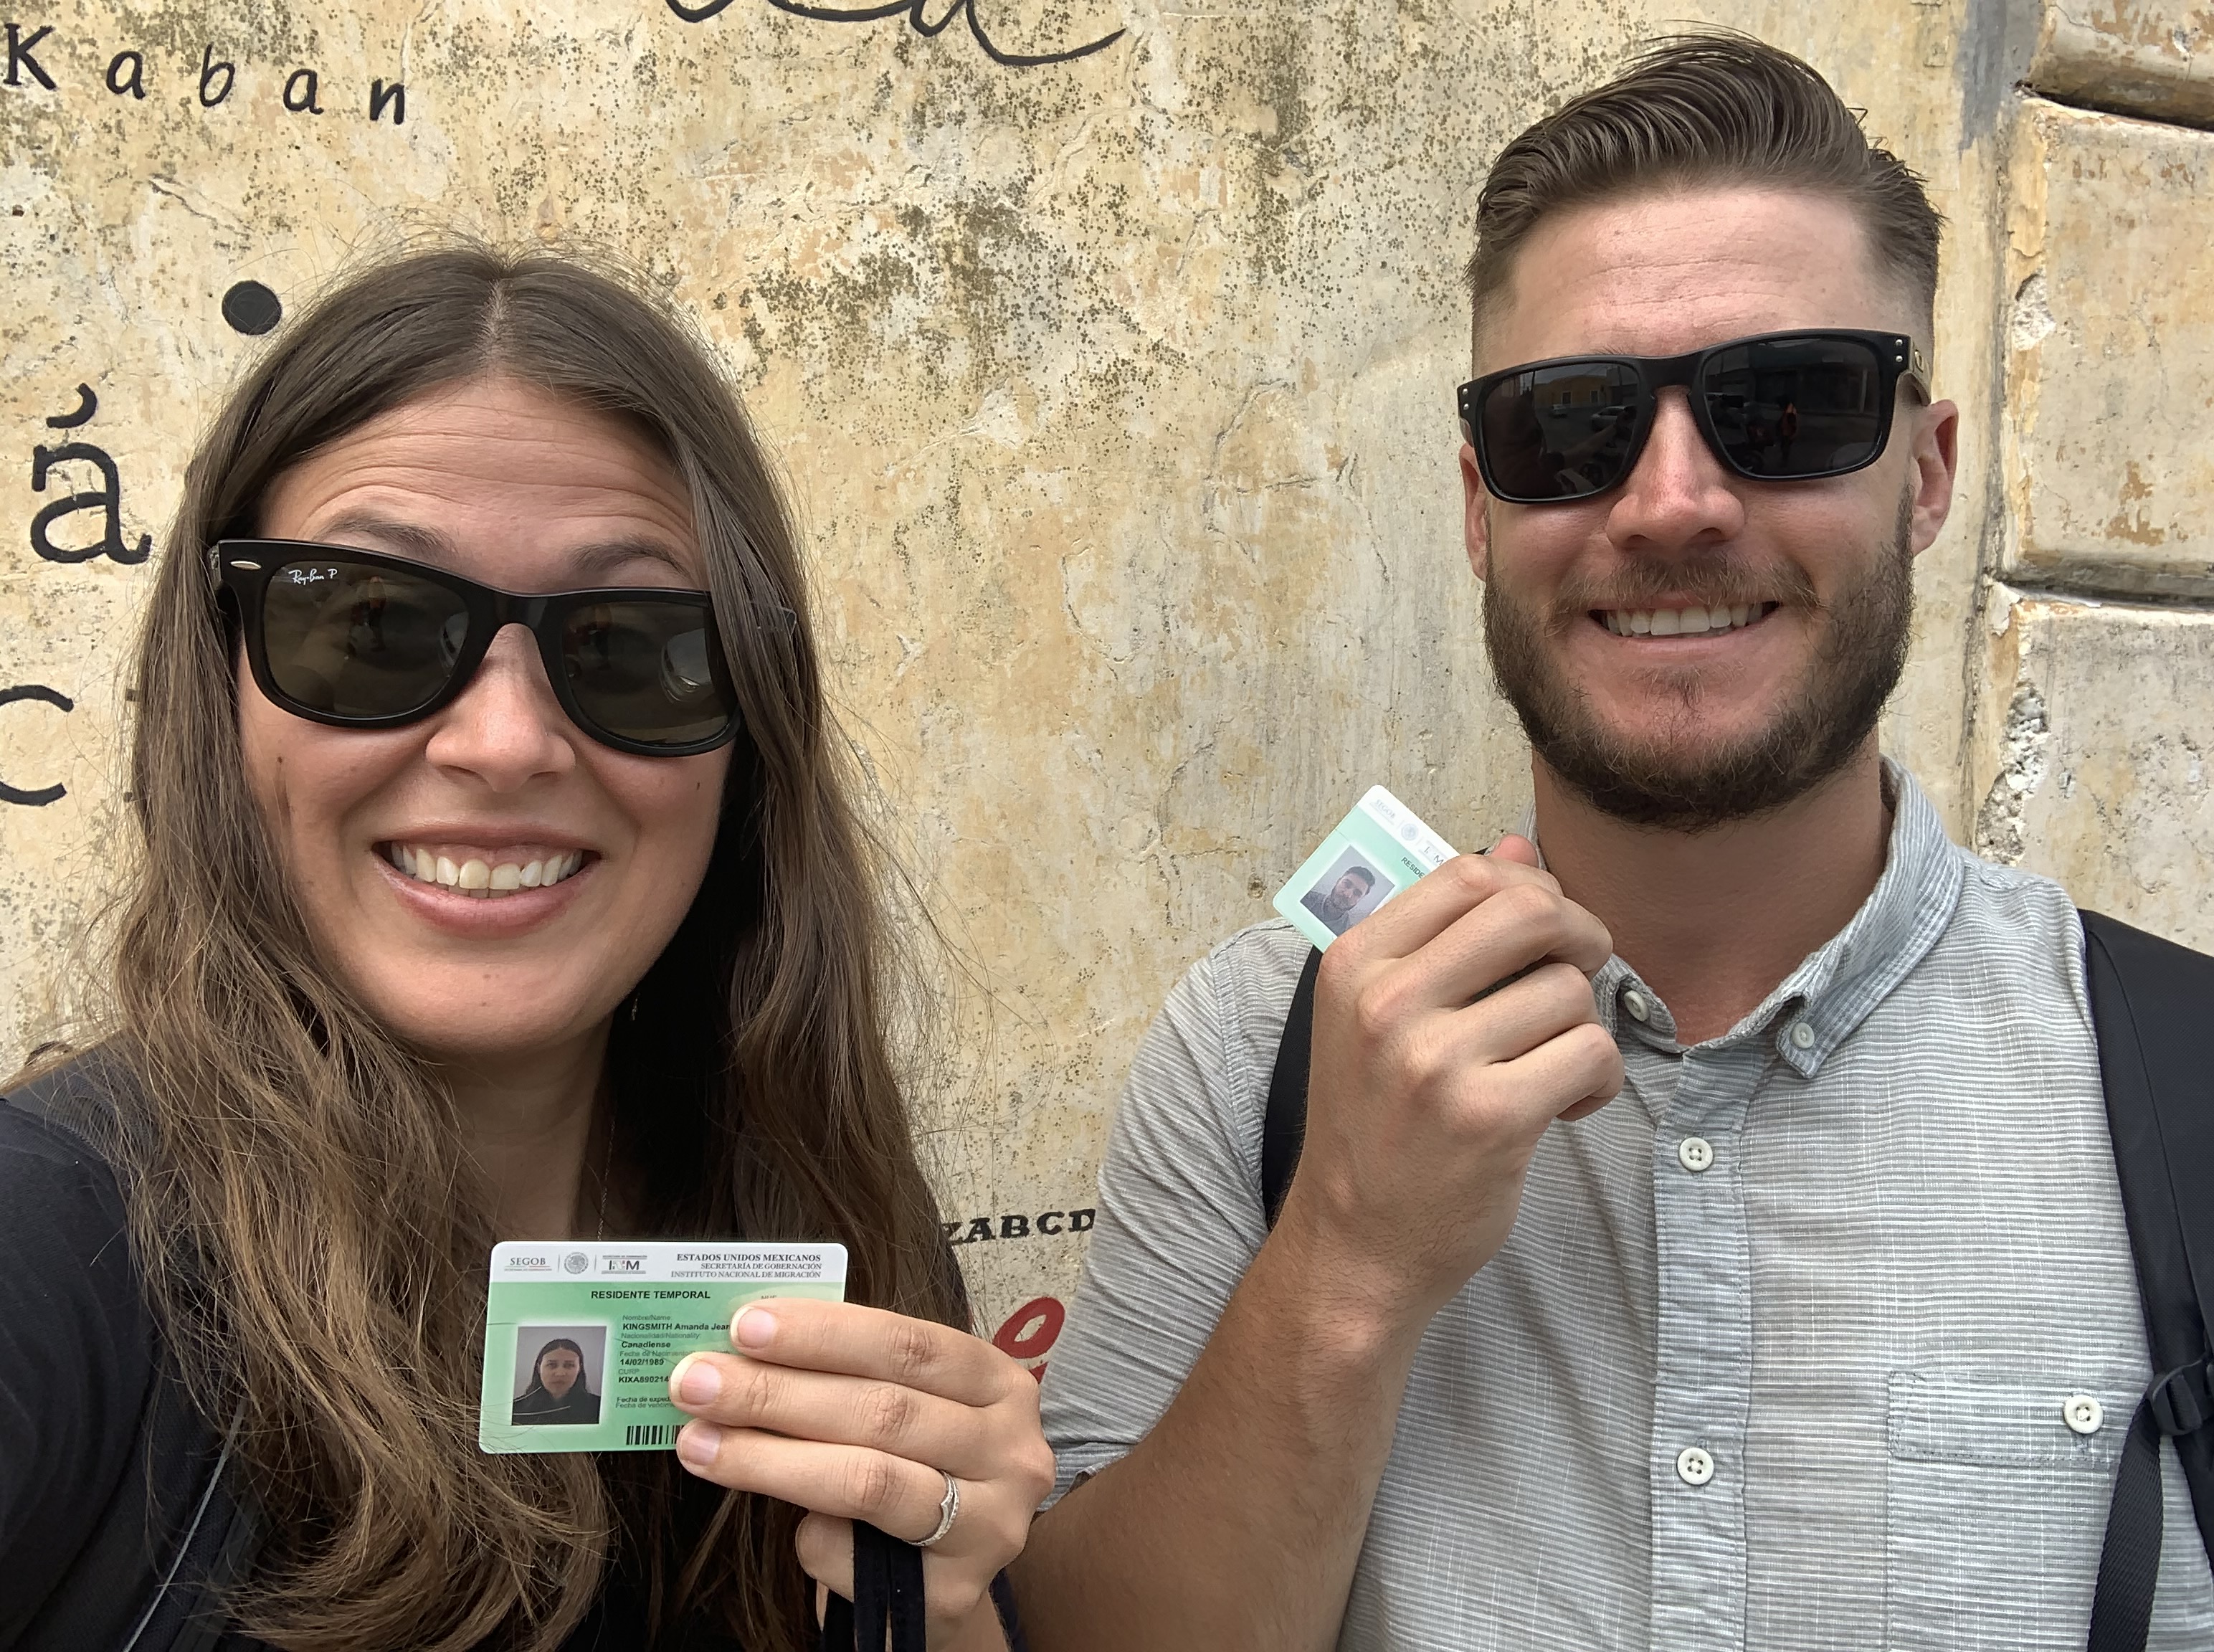 Getting Temporary Resident Visas in Mexico: Our Experience